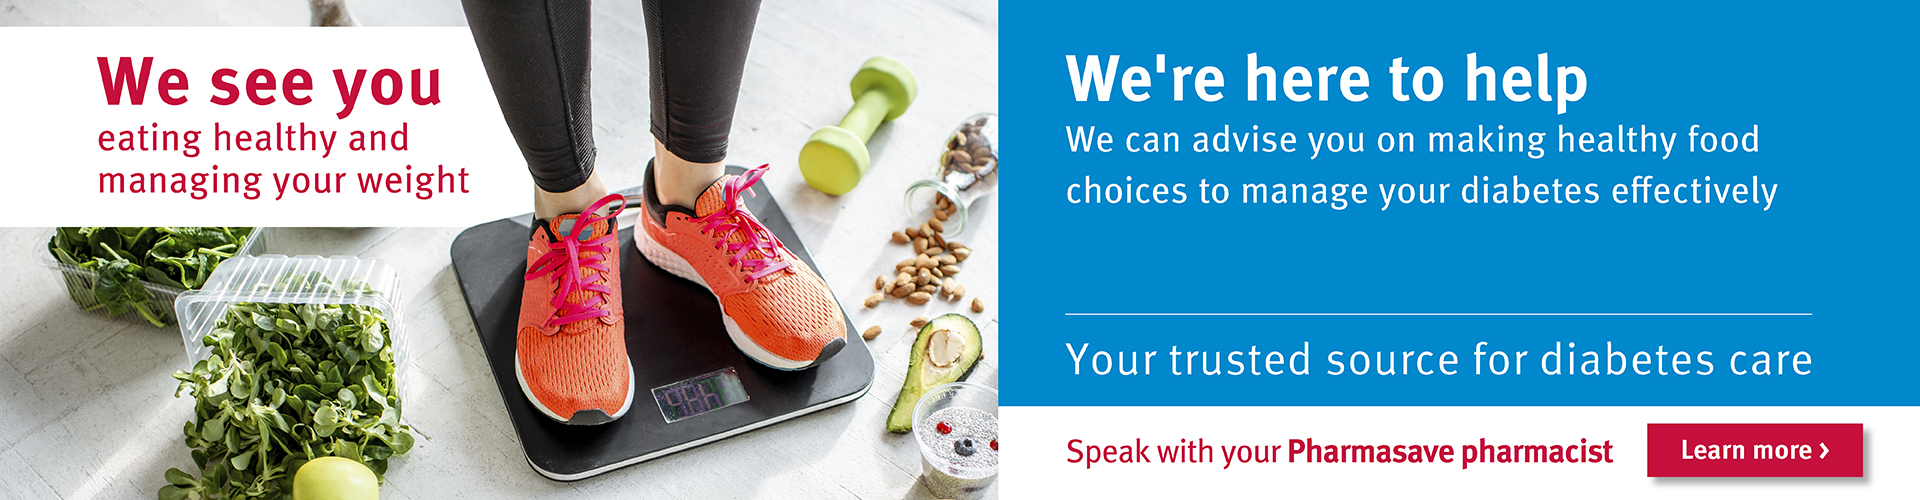 We see you eating healthy and managing your weight and your Pharmasave pharmacist is here to help.